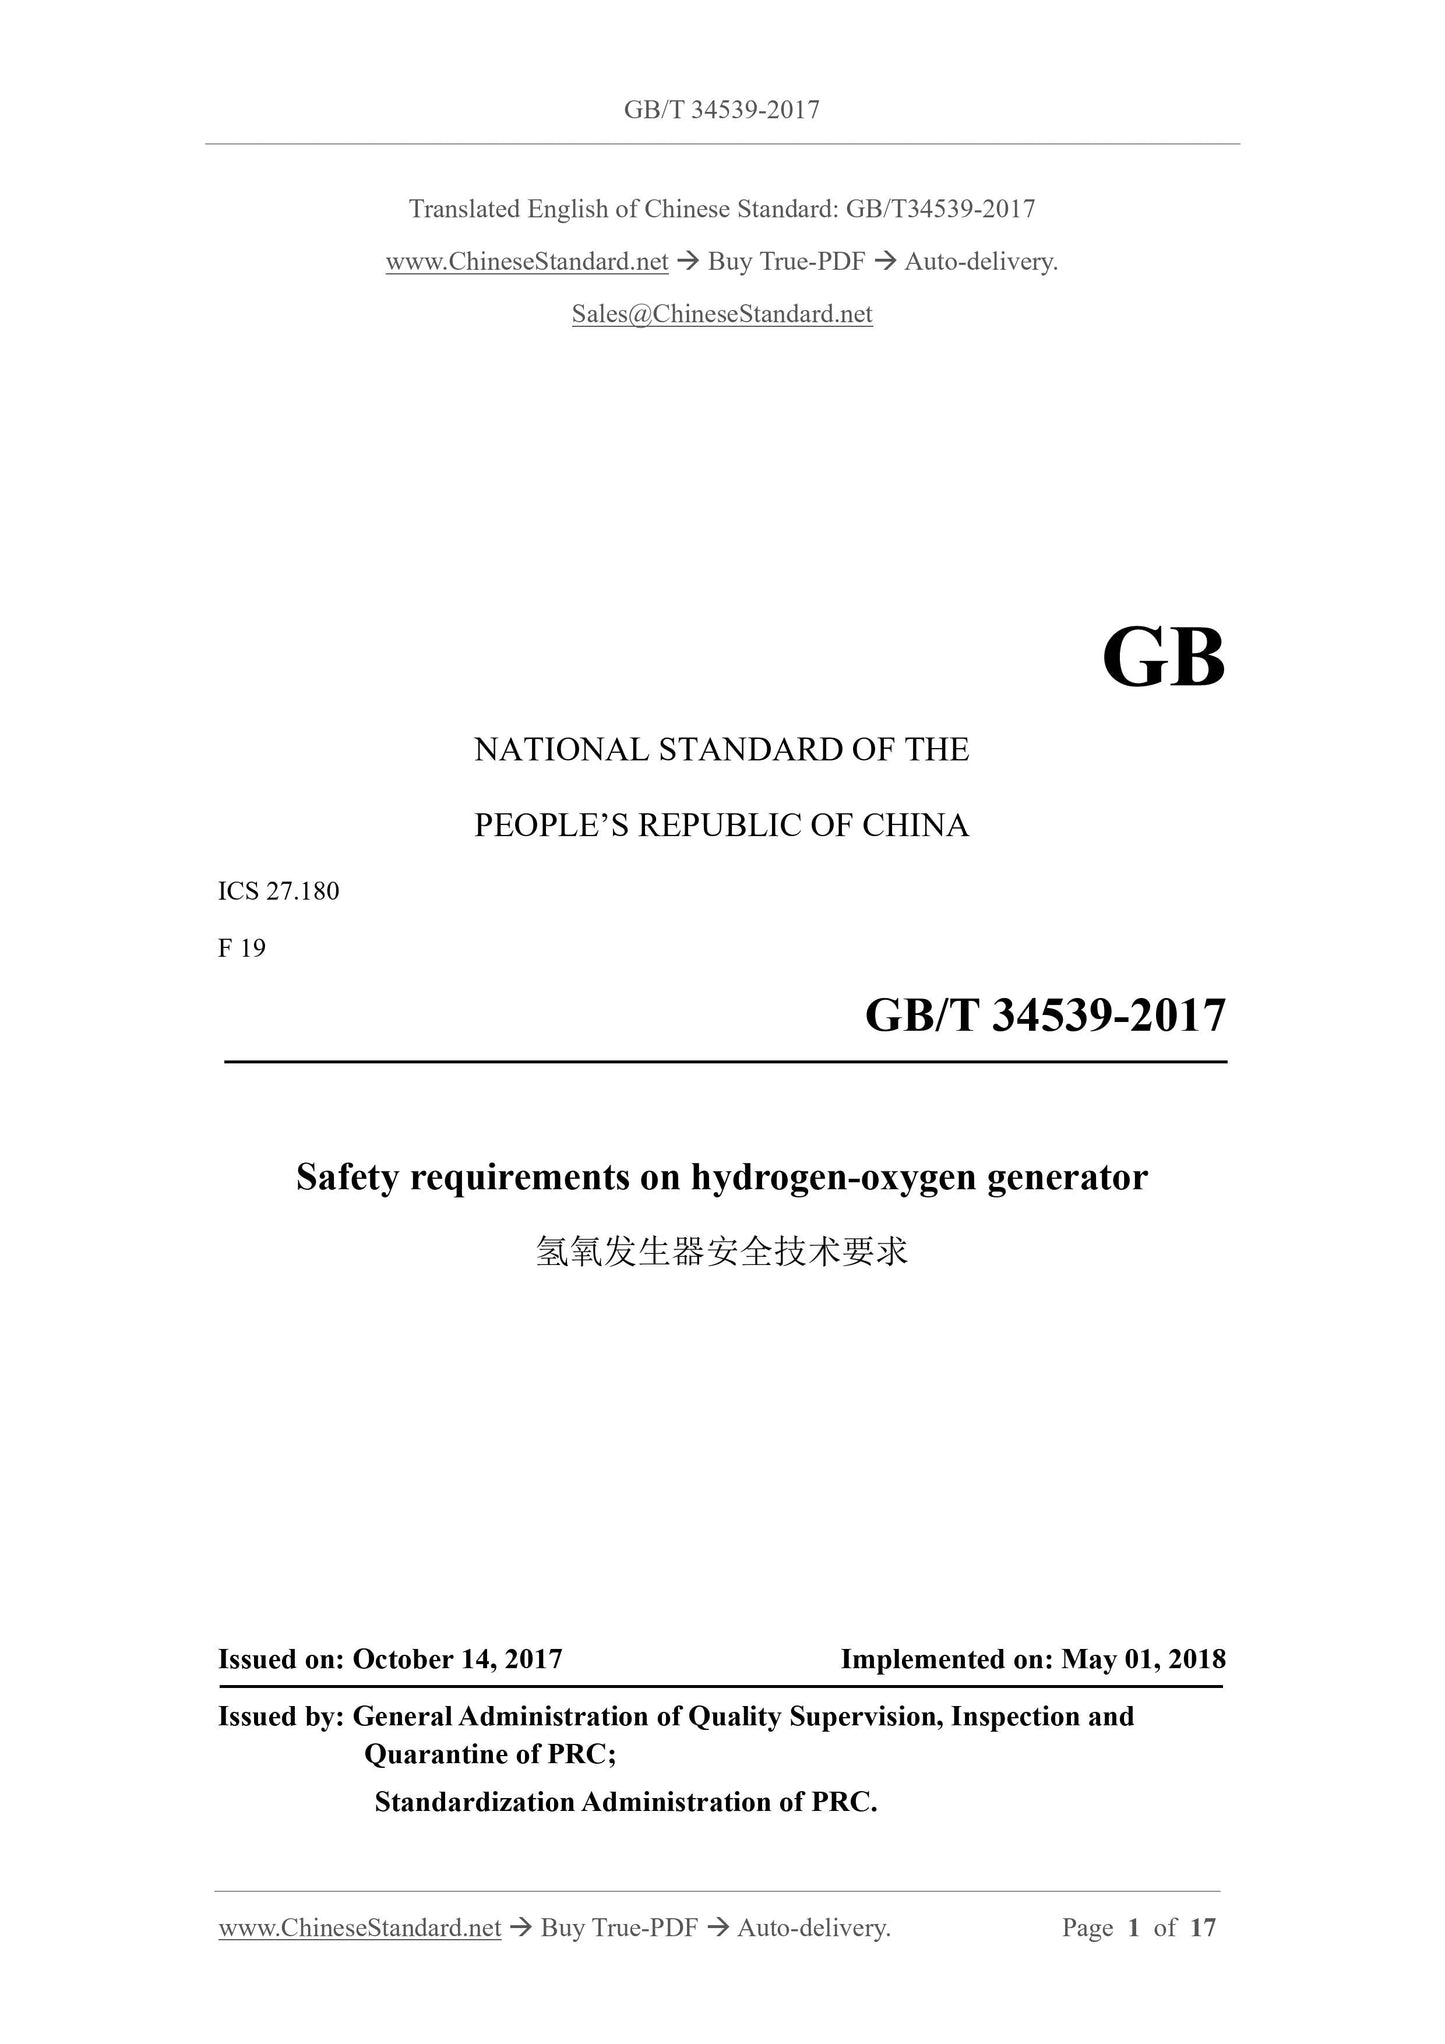 GB/T 34539-2017 Page 1